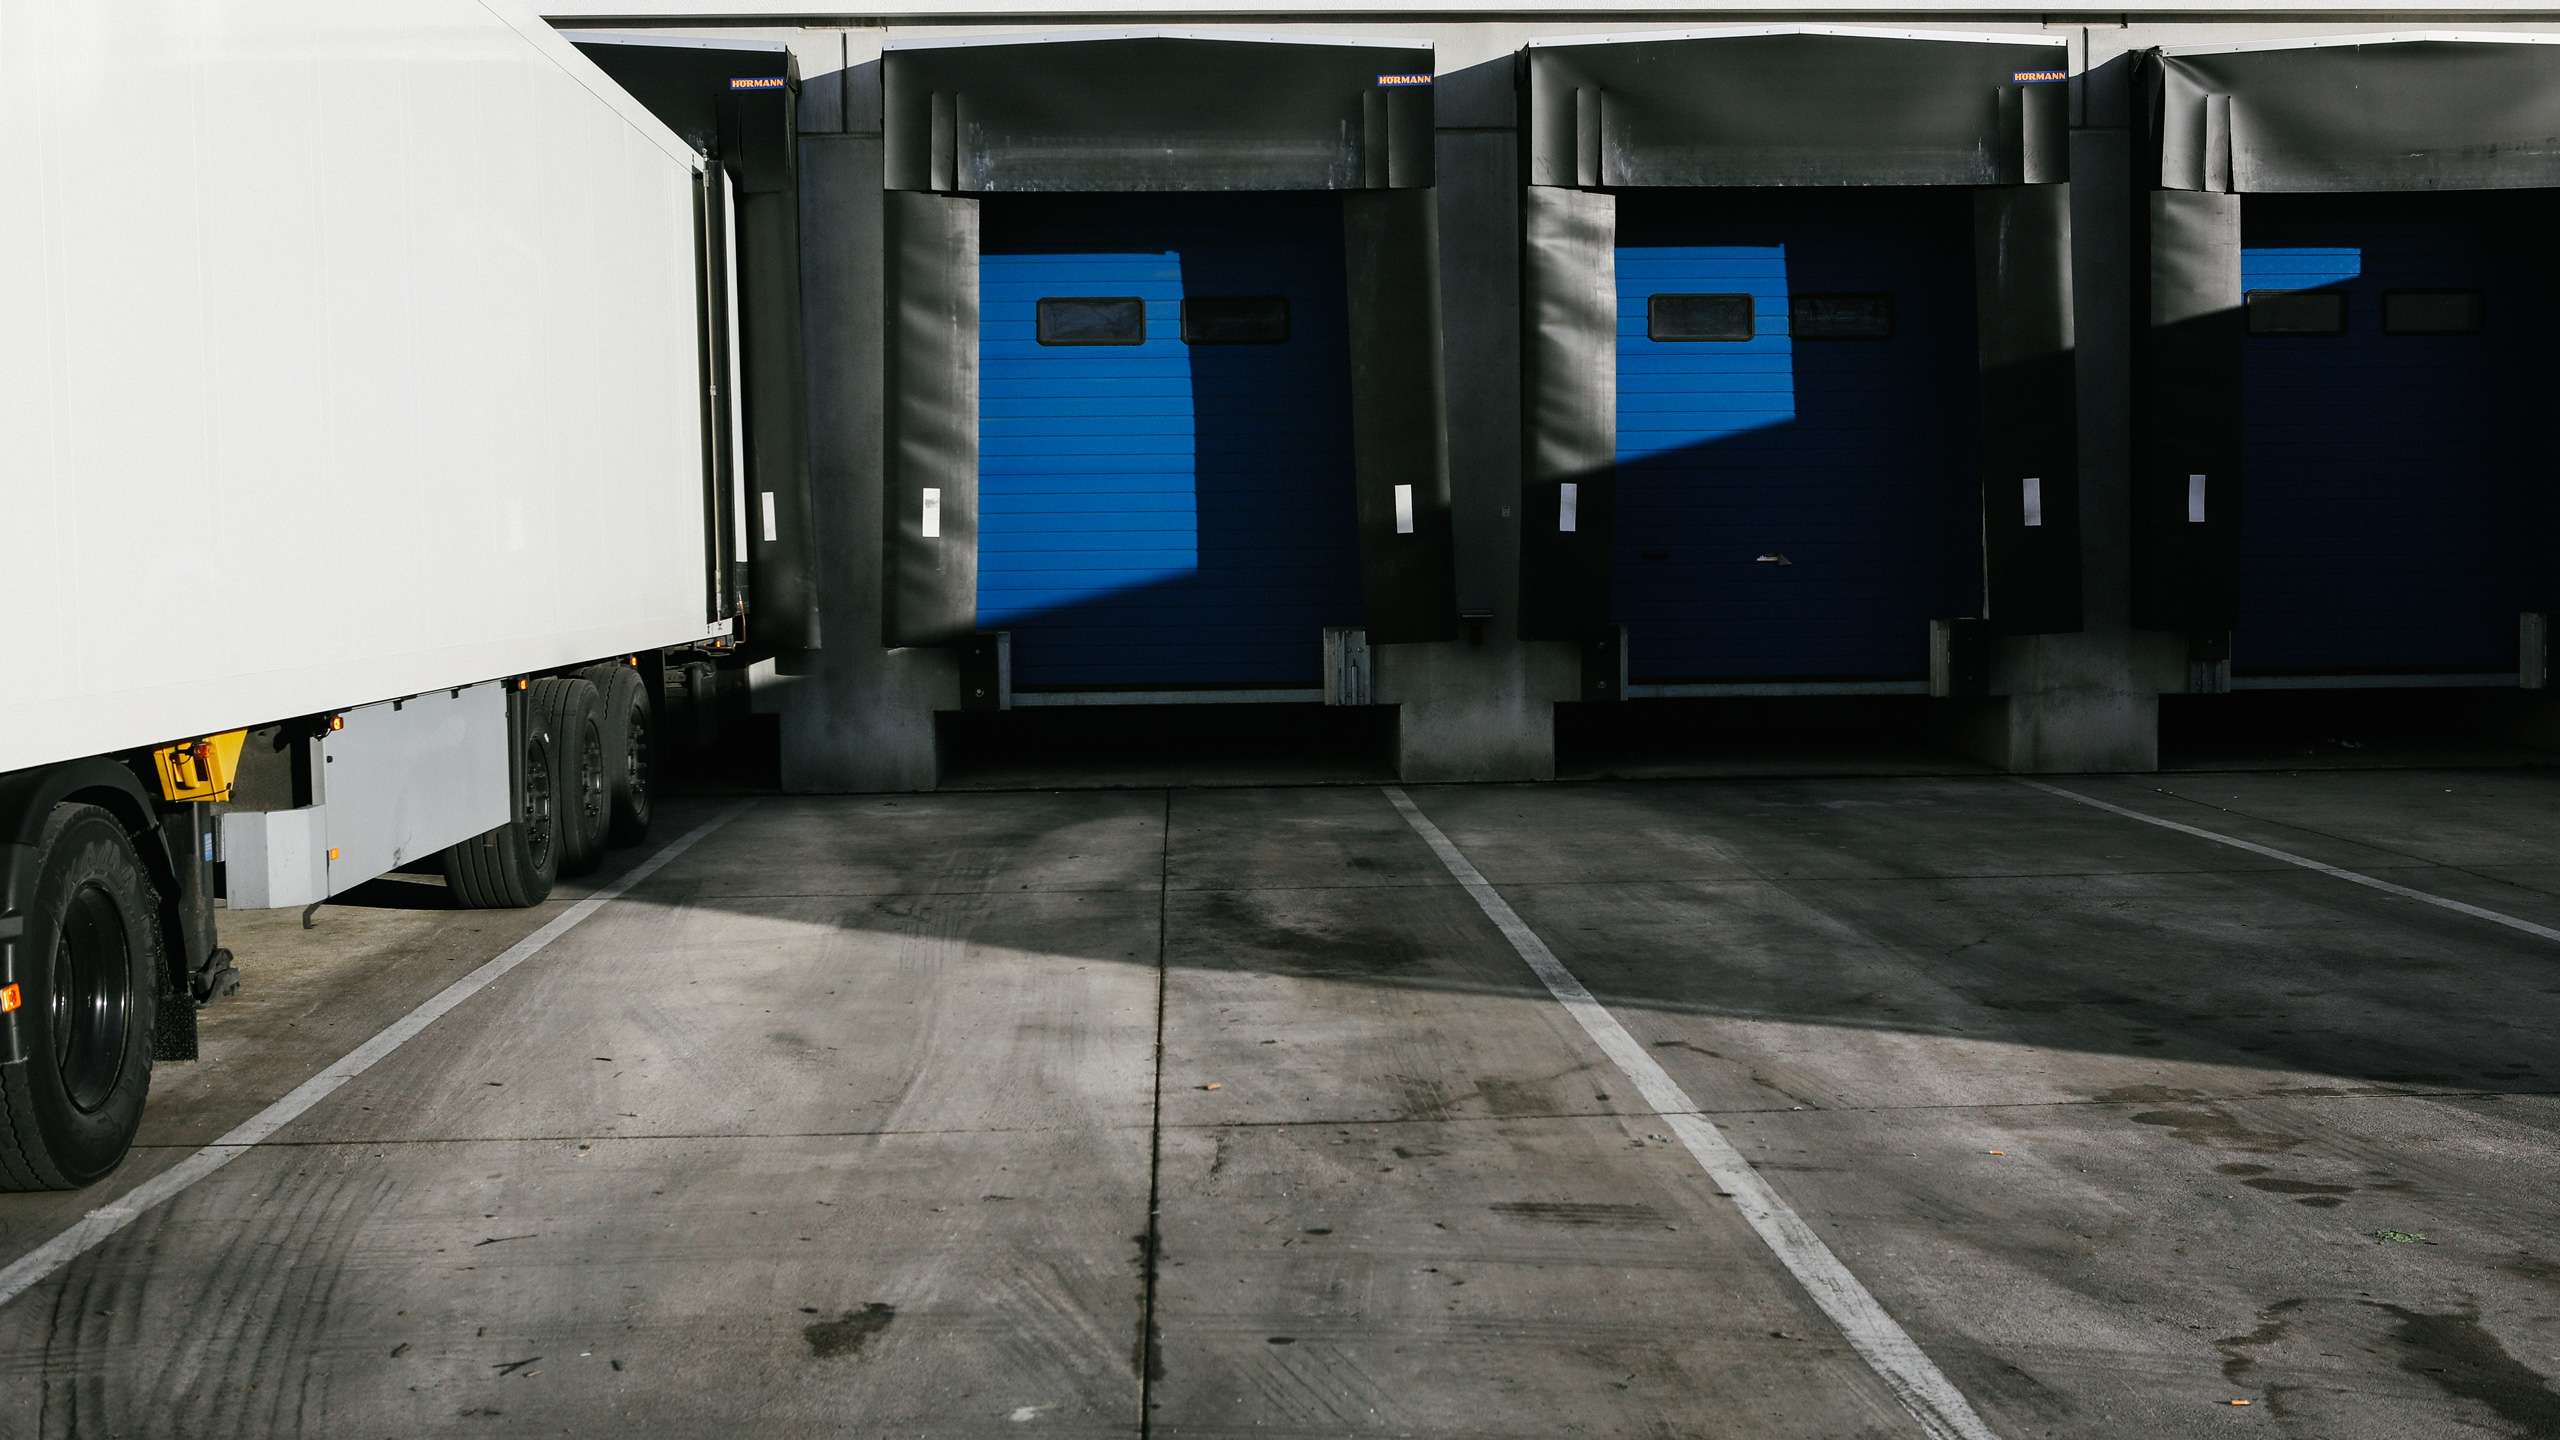 The loading ramps with the blue rolling doors are illuminated by the sunlight. On the left, a truck docks at a loading ramp.